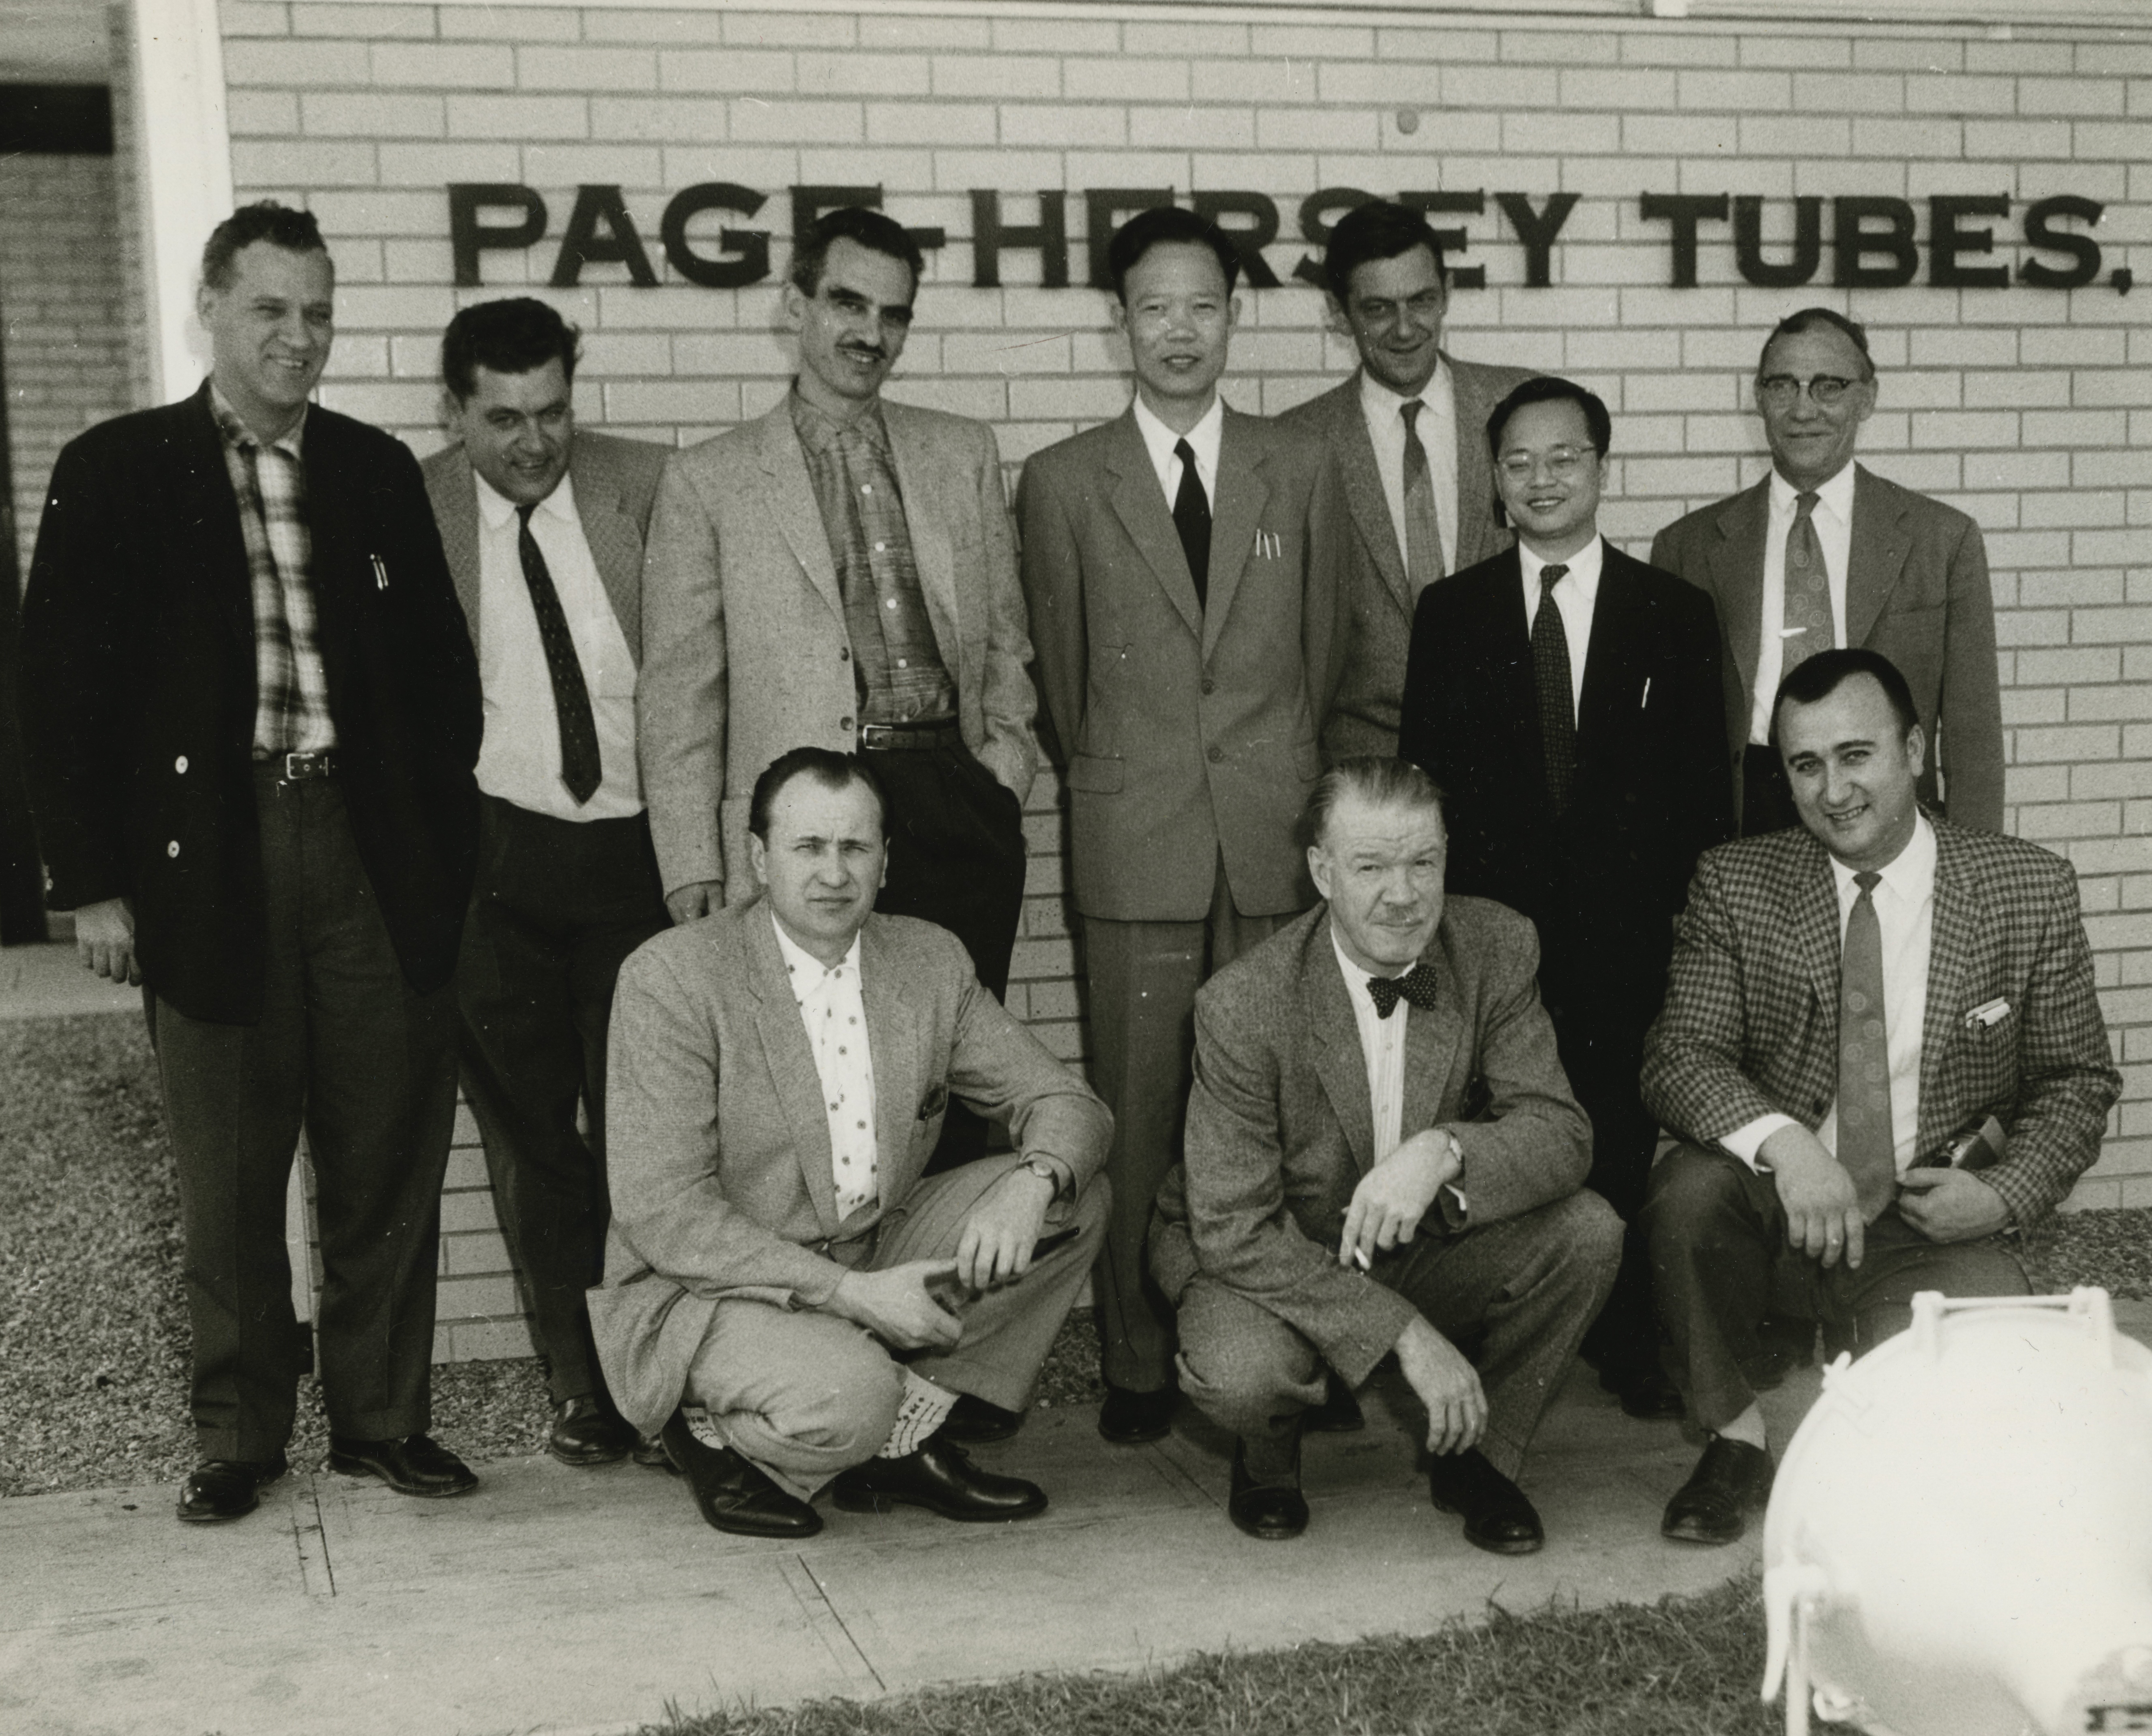 A group of men in suits and ties pose in front of a building which reads "Page-Hersey Tubes"